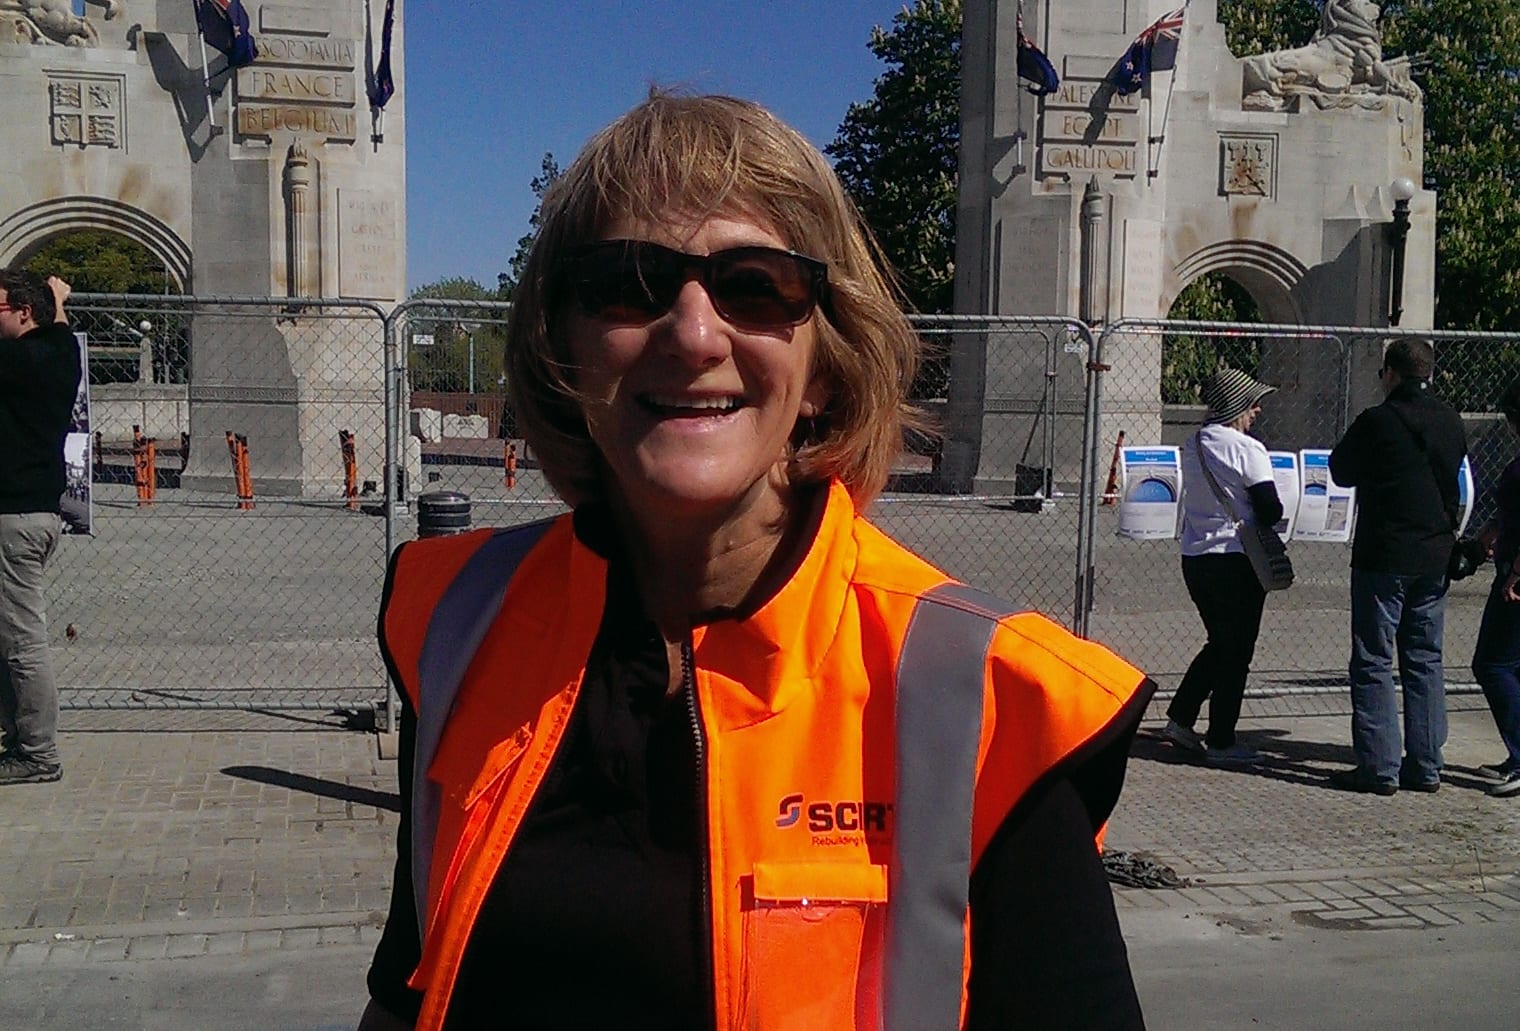 Ros Service next to Christchurch's iconic Triumphal Arch, which cost almost $7 million to fix after the earthquakes.